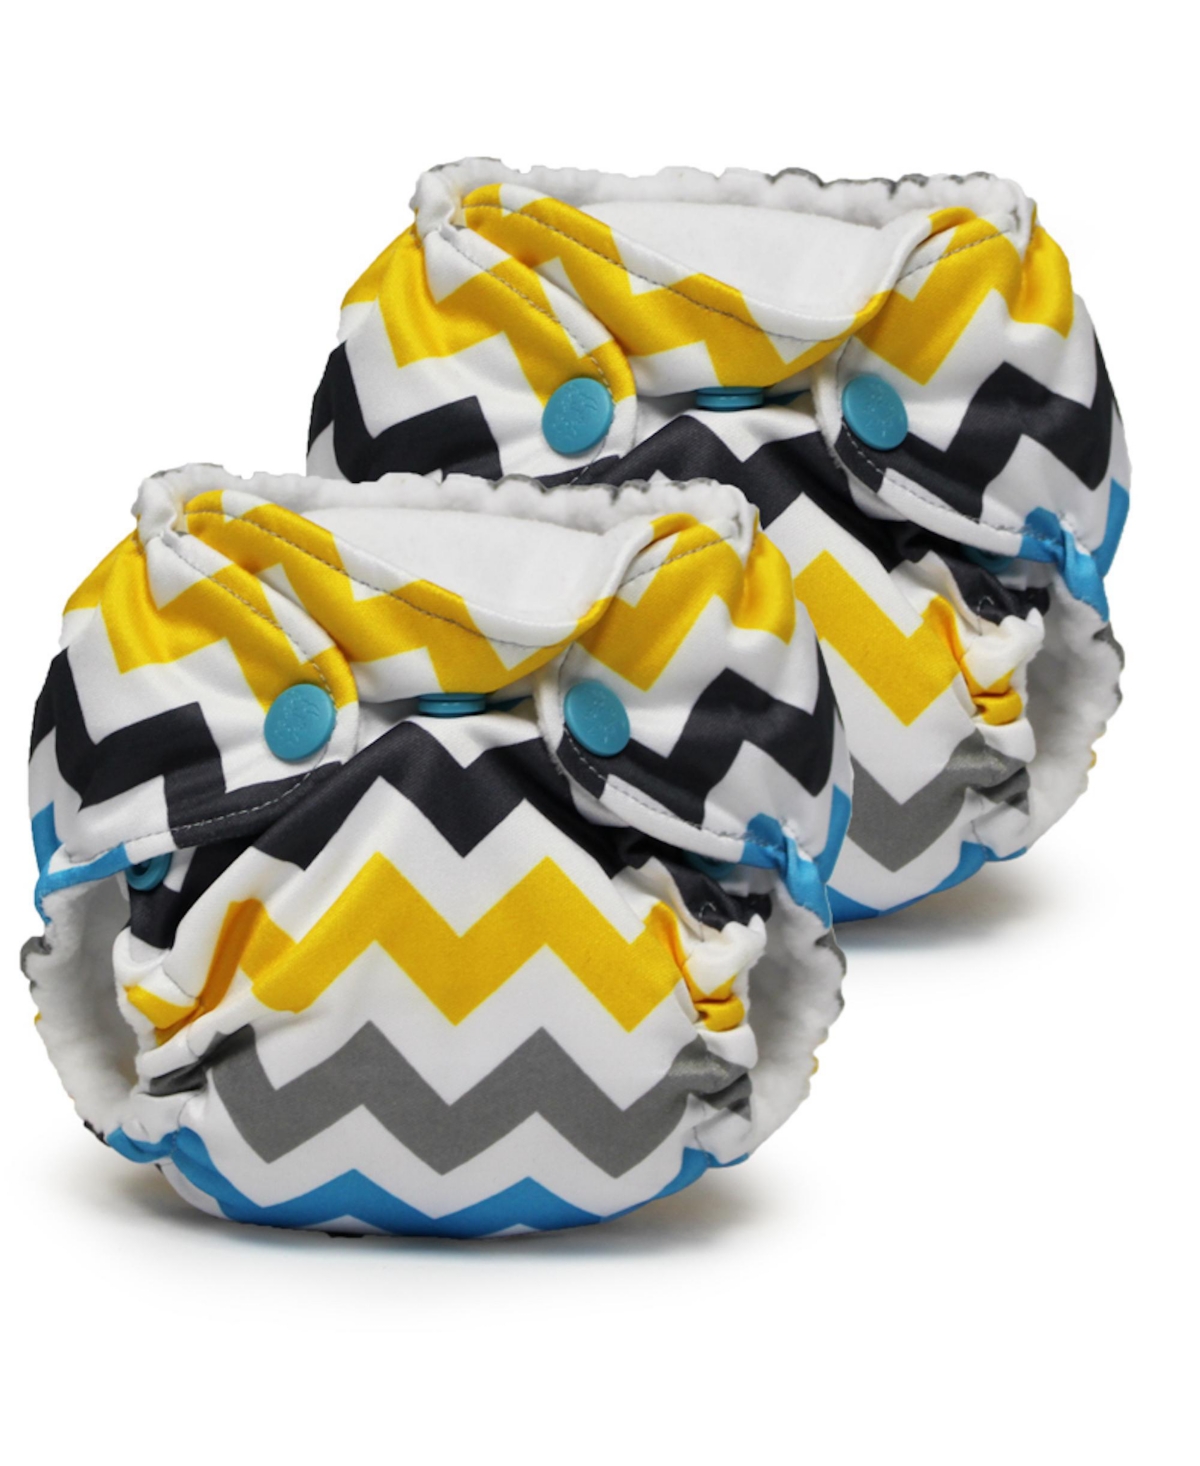 Kanga Care Lil Joey Newborn All In One Aio Cloth Diaper (2pk) In Charlie